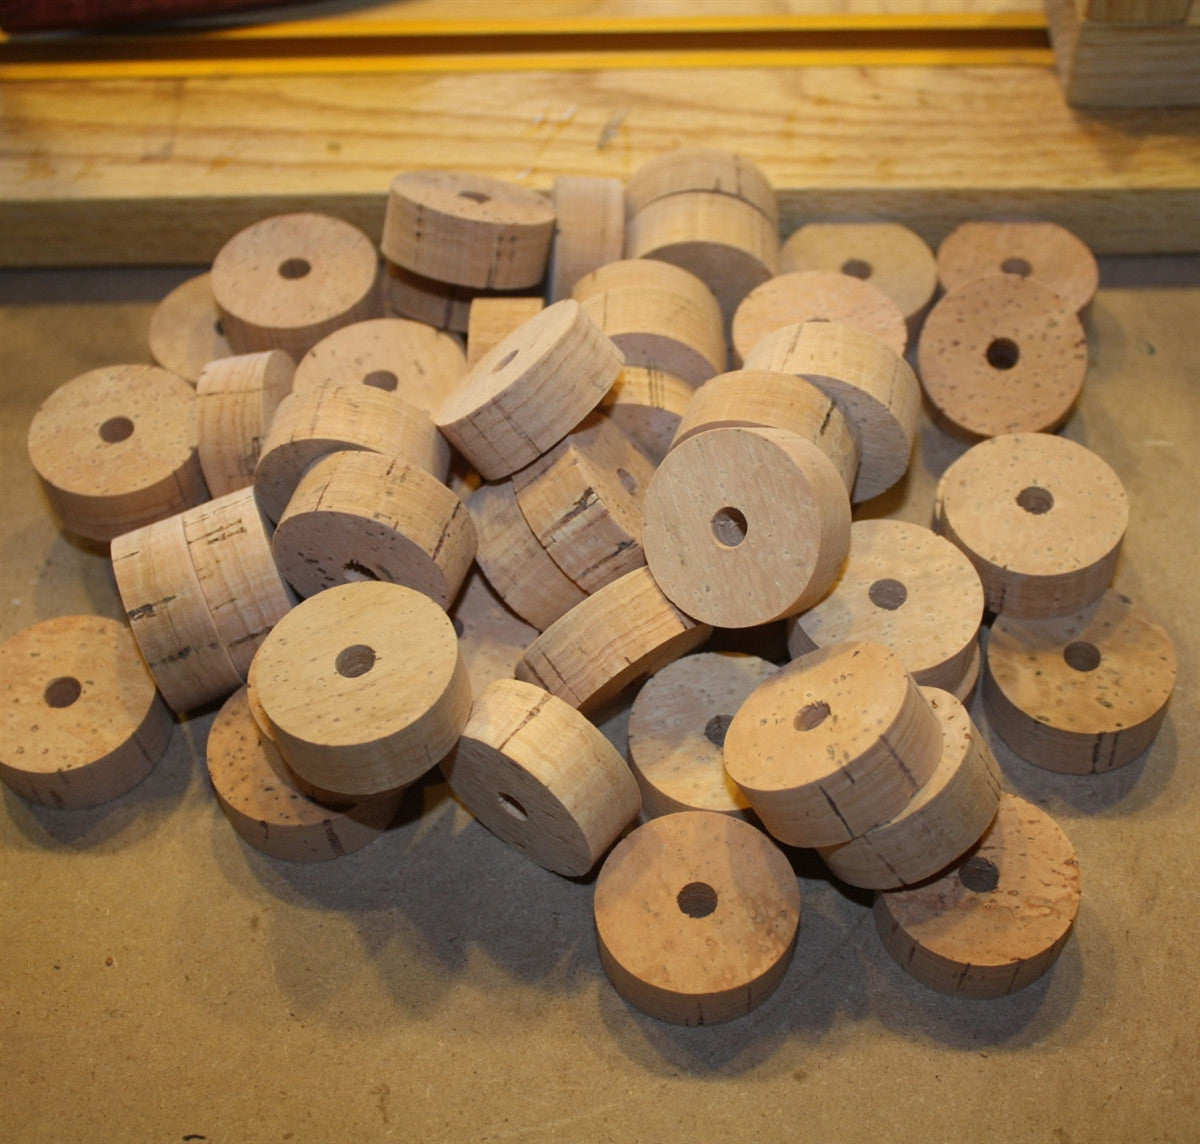 Flor Grade Cork Rings for rod building. These rings are graded as